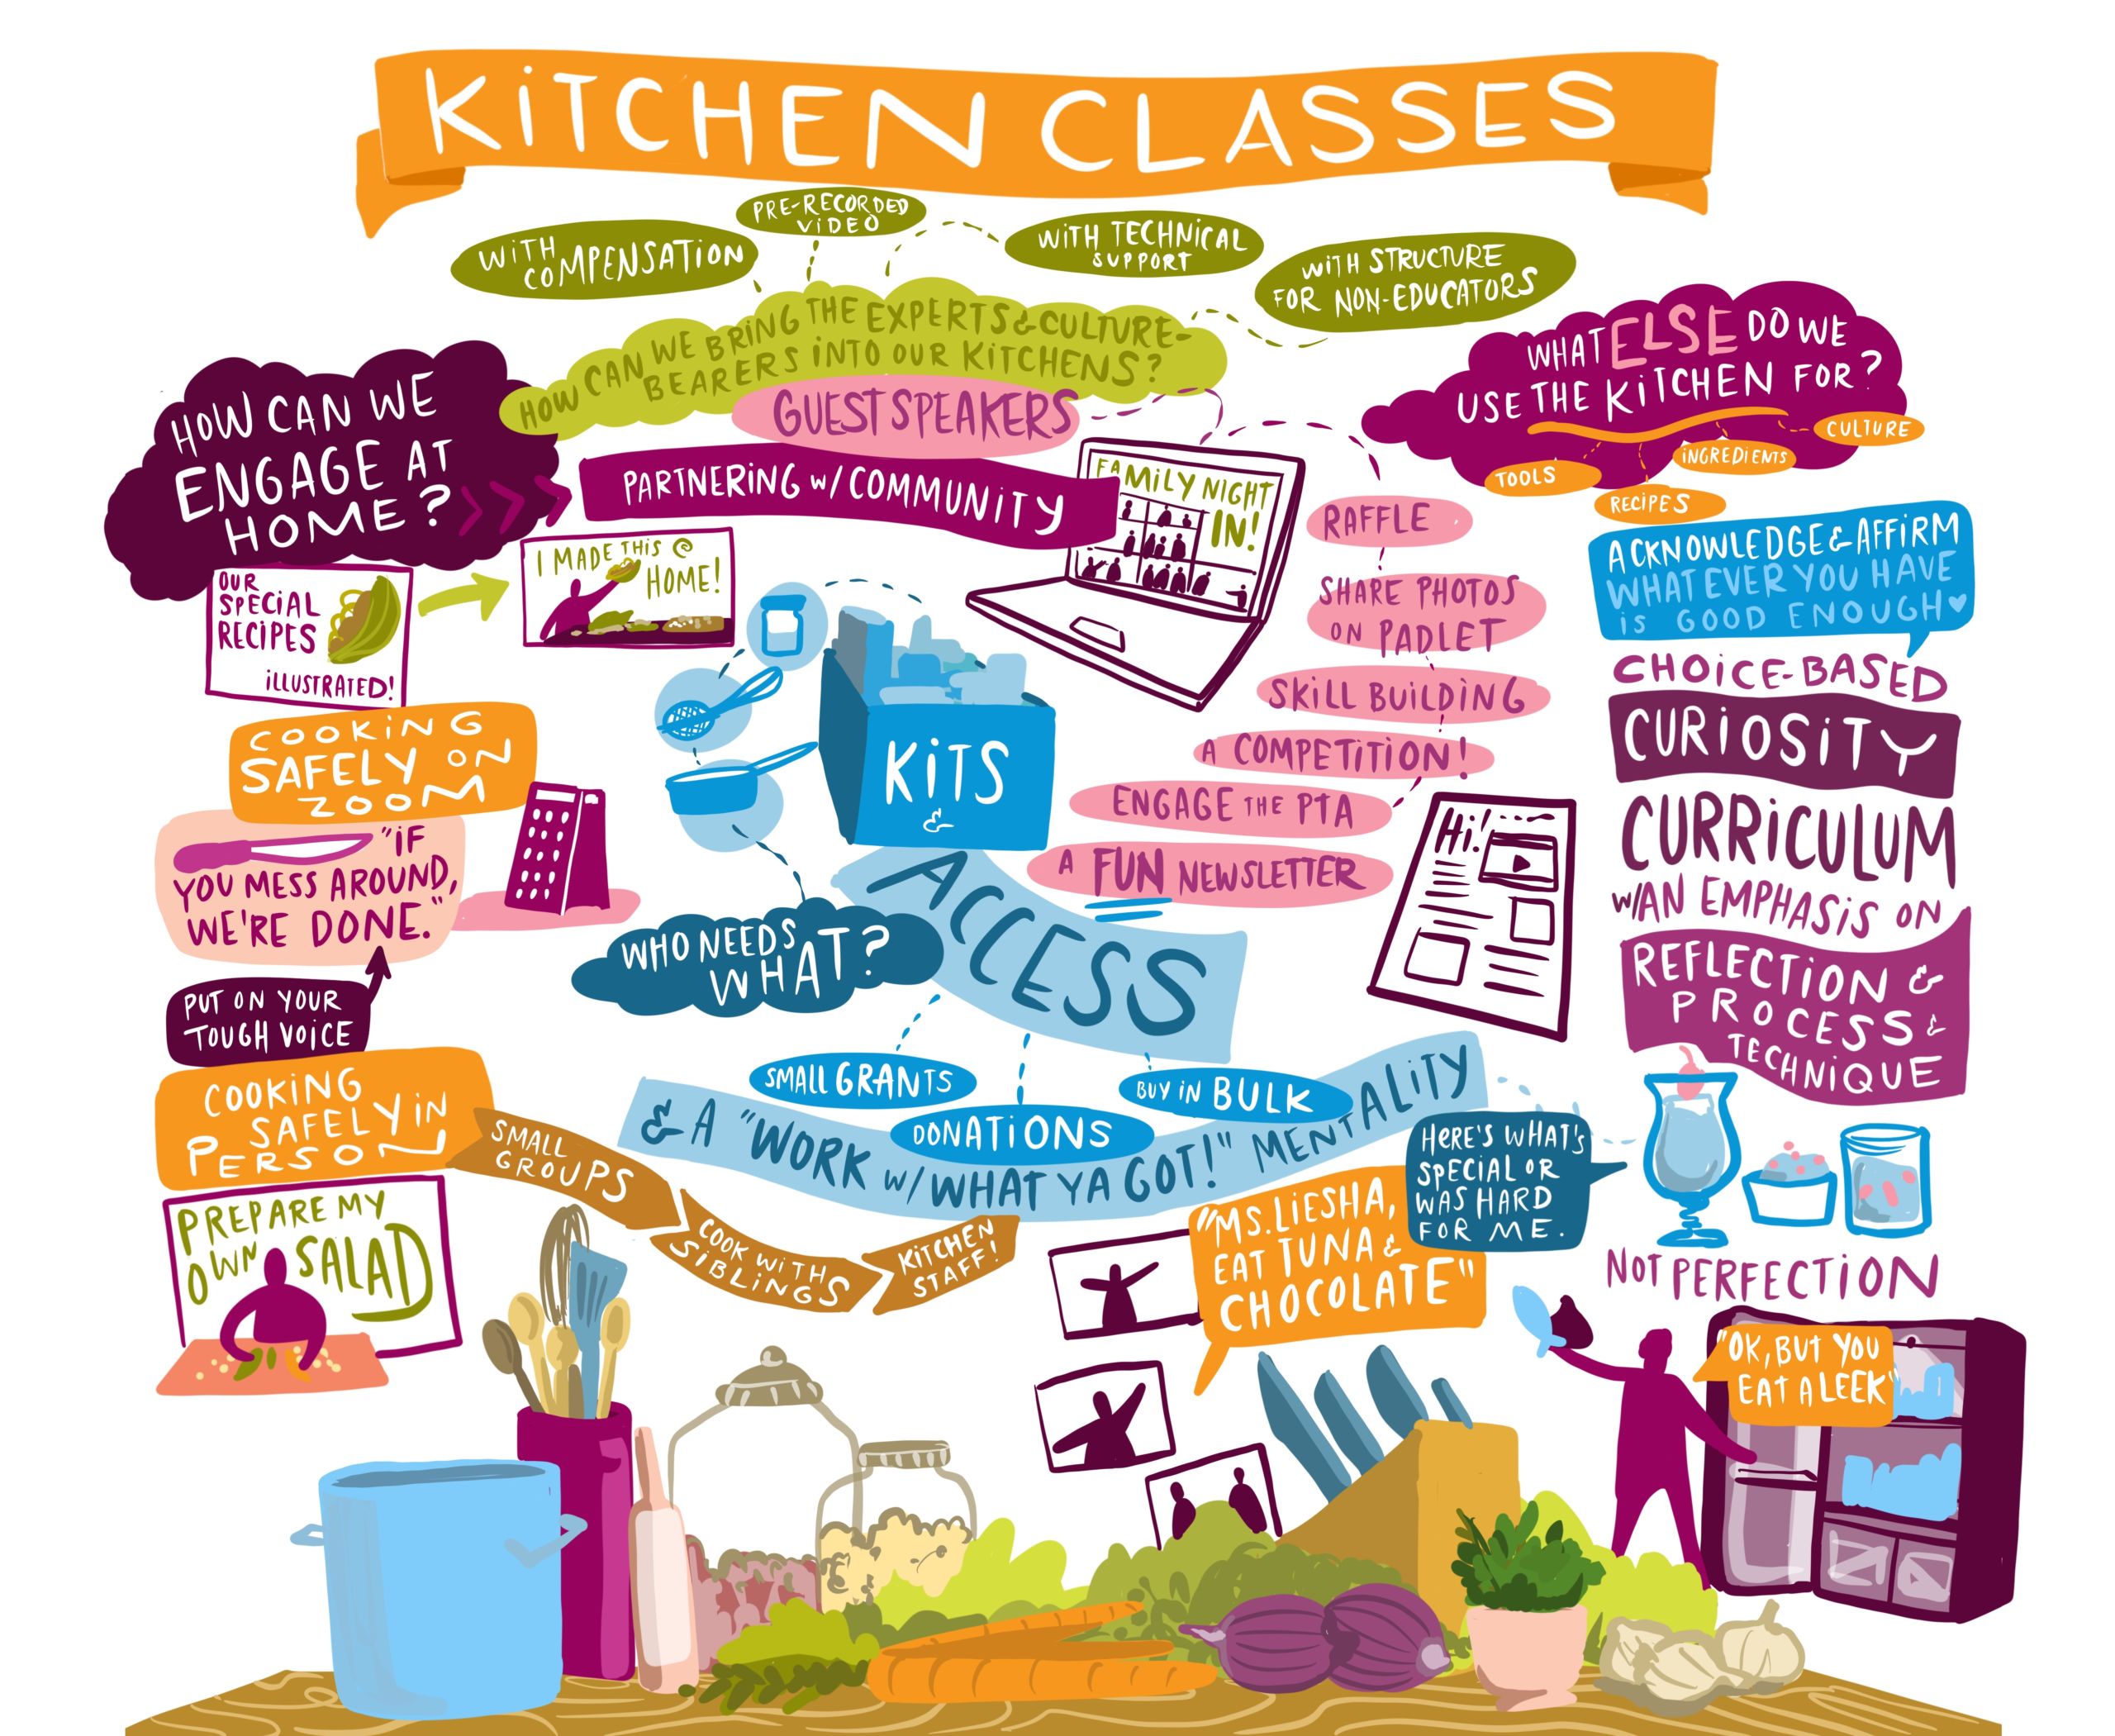 Visual notes from kitchen classes session